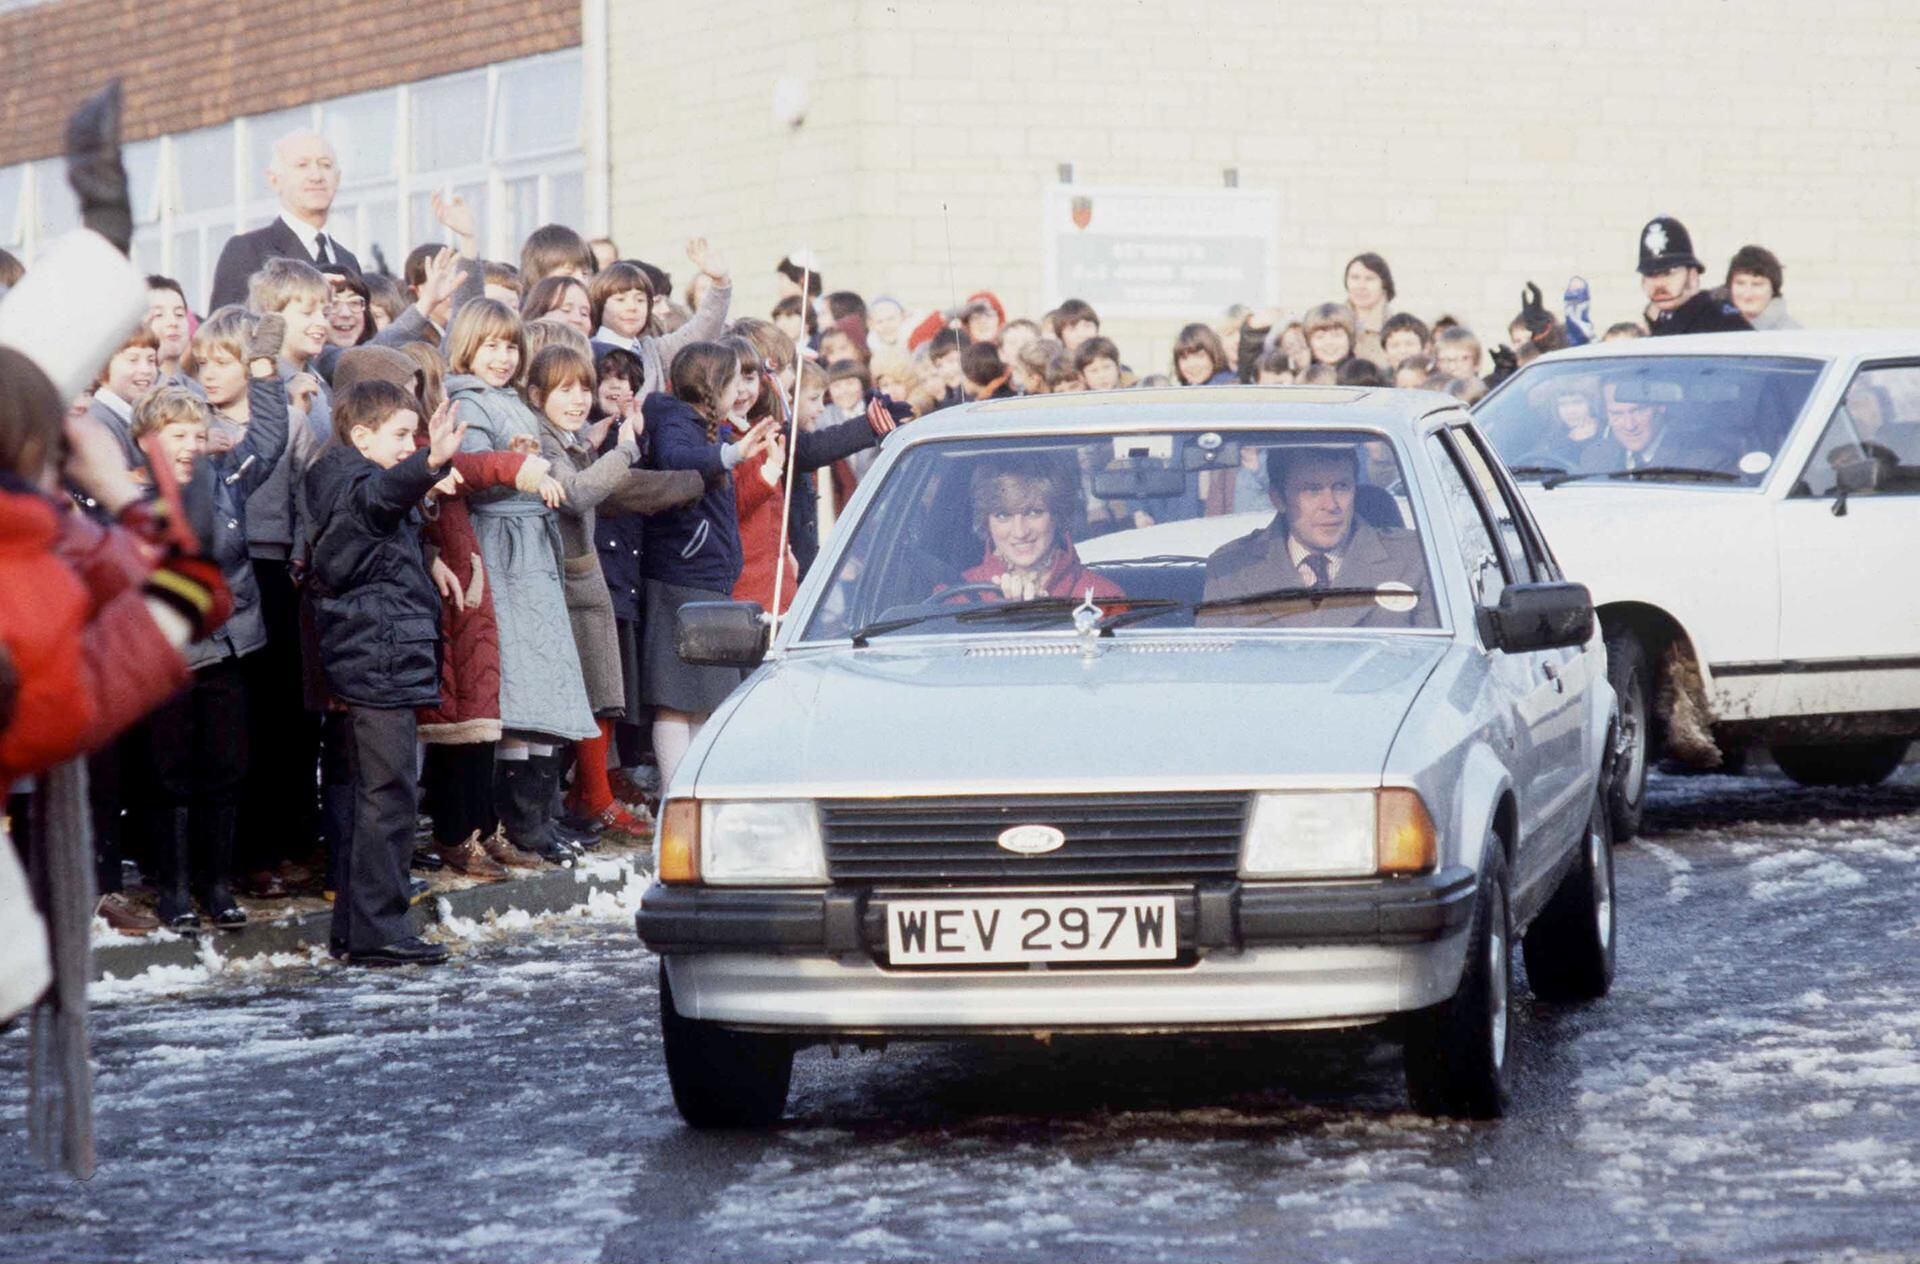 Ford Escort given to Princess Diana by Prince Charles ...